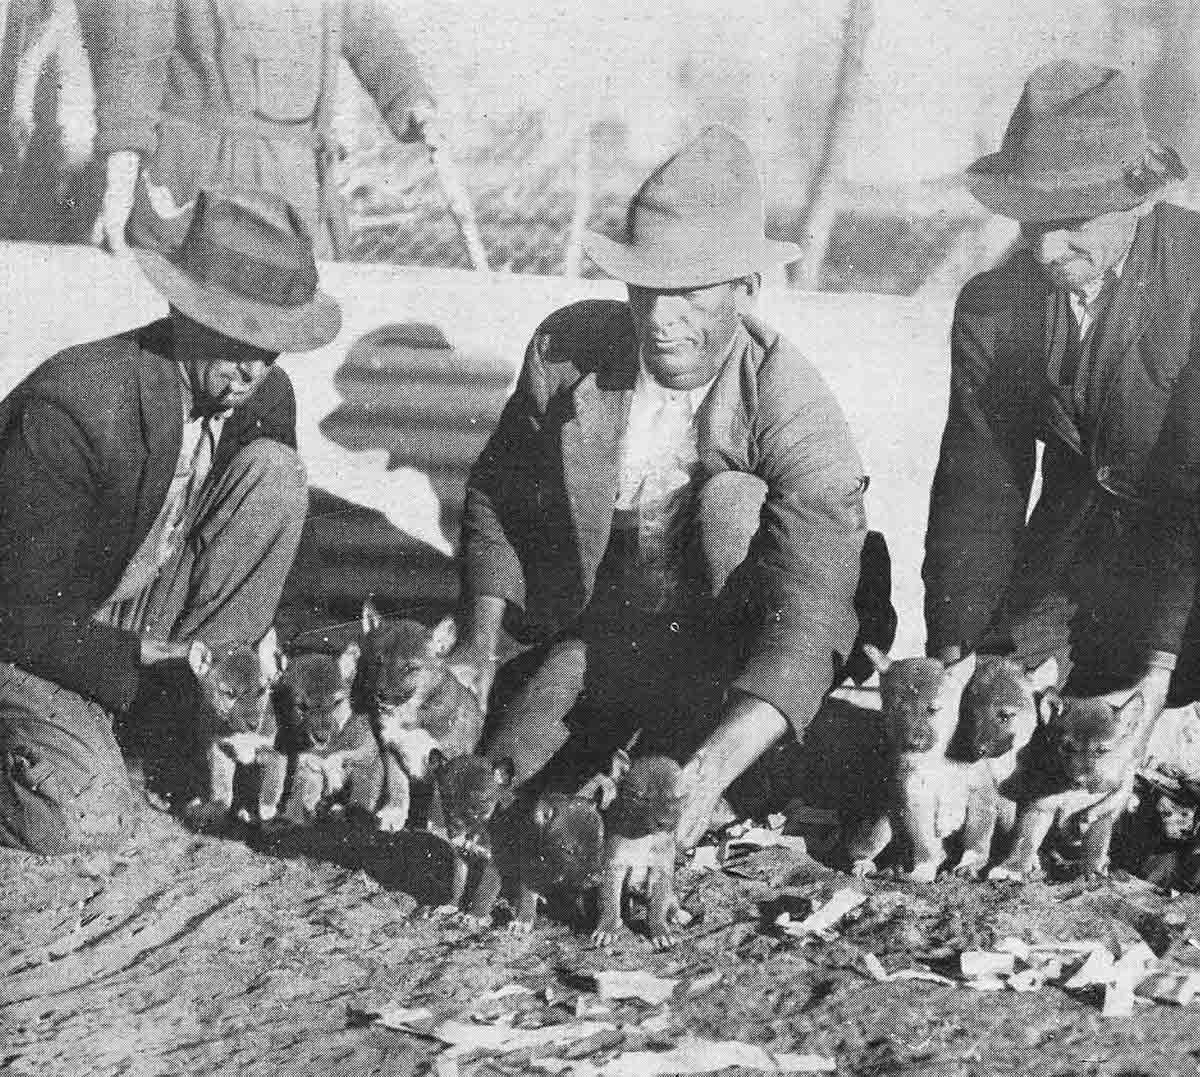 Black and white photograph of three men with coats and hats on kneeling down with two litters of dingoes in front of them.